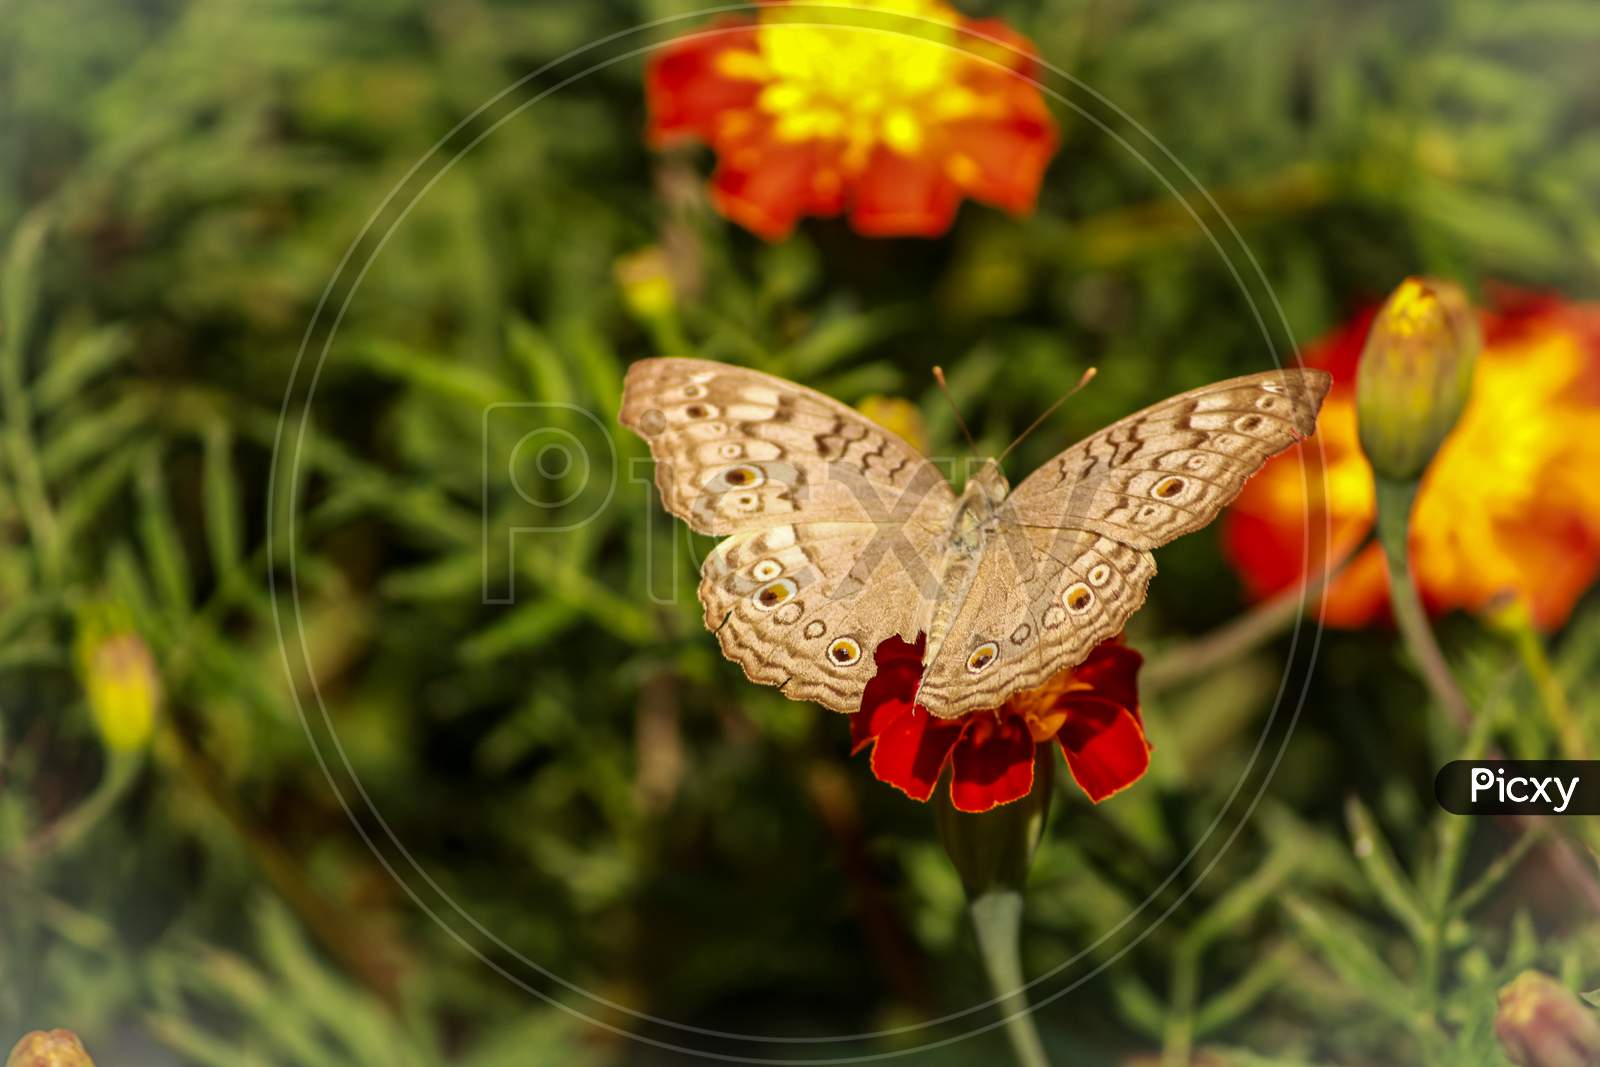 Butterfly attracted towards flower